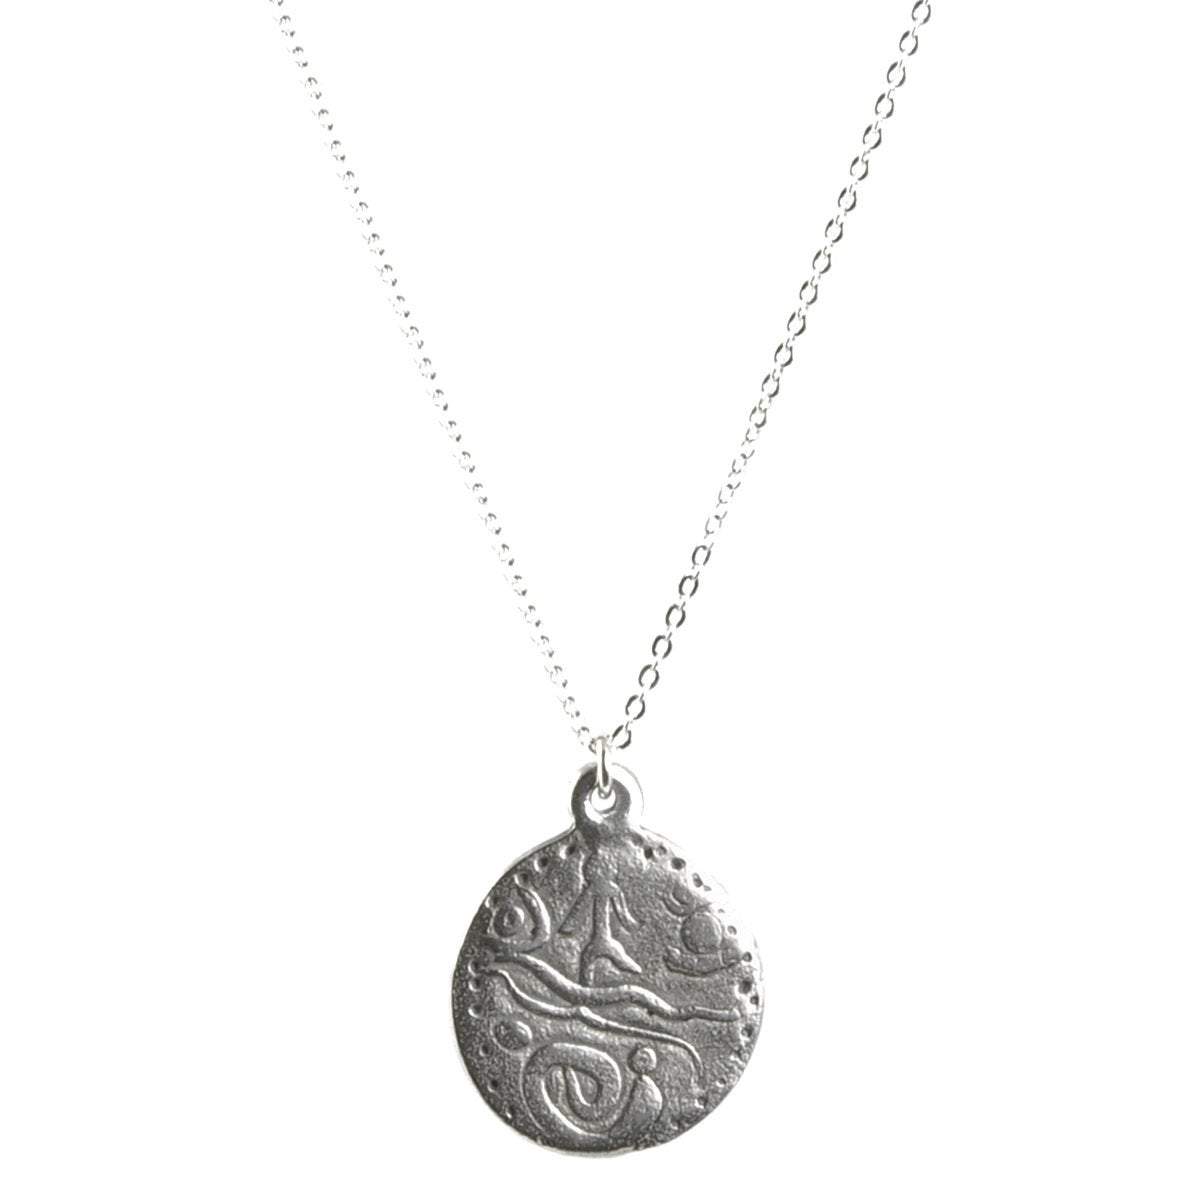 Finished Jewelry-Minimalist Jewelry-Silver Ancient Disc Pendant Necklace